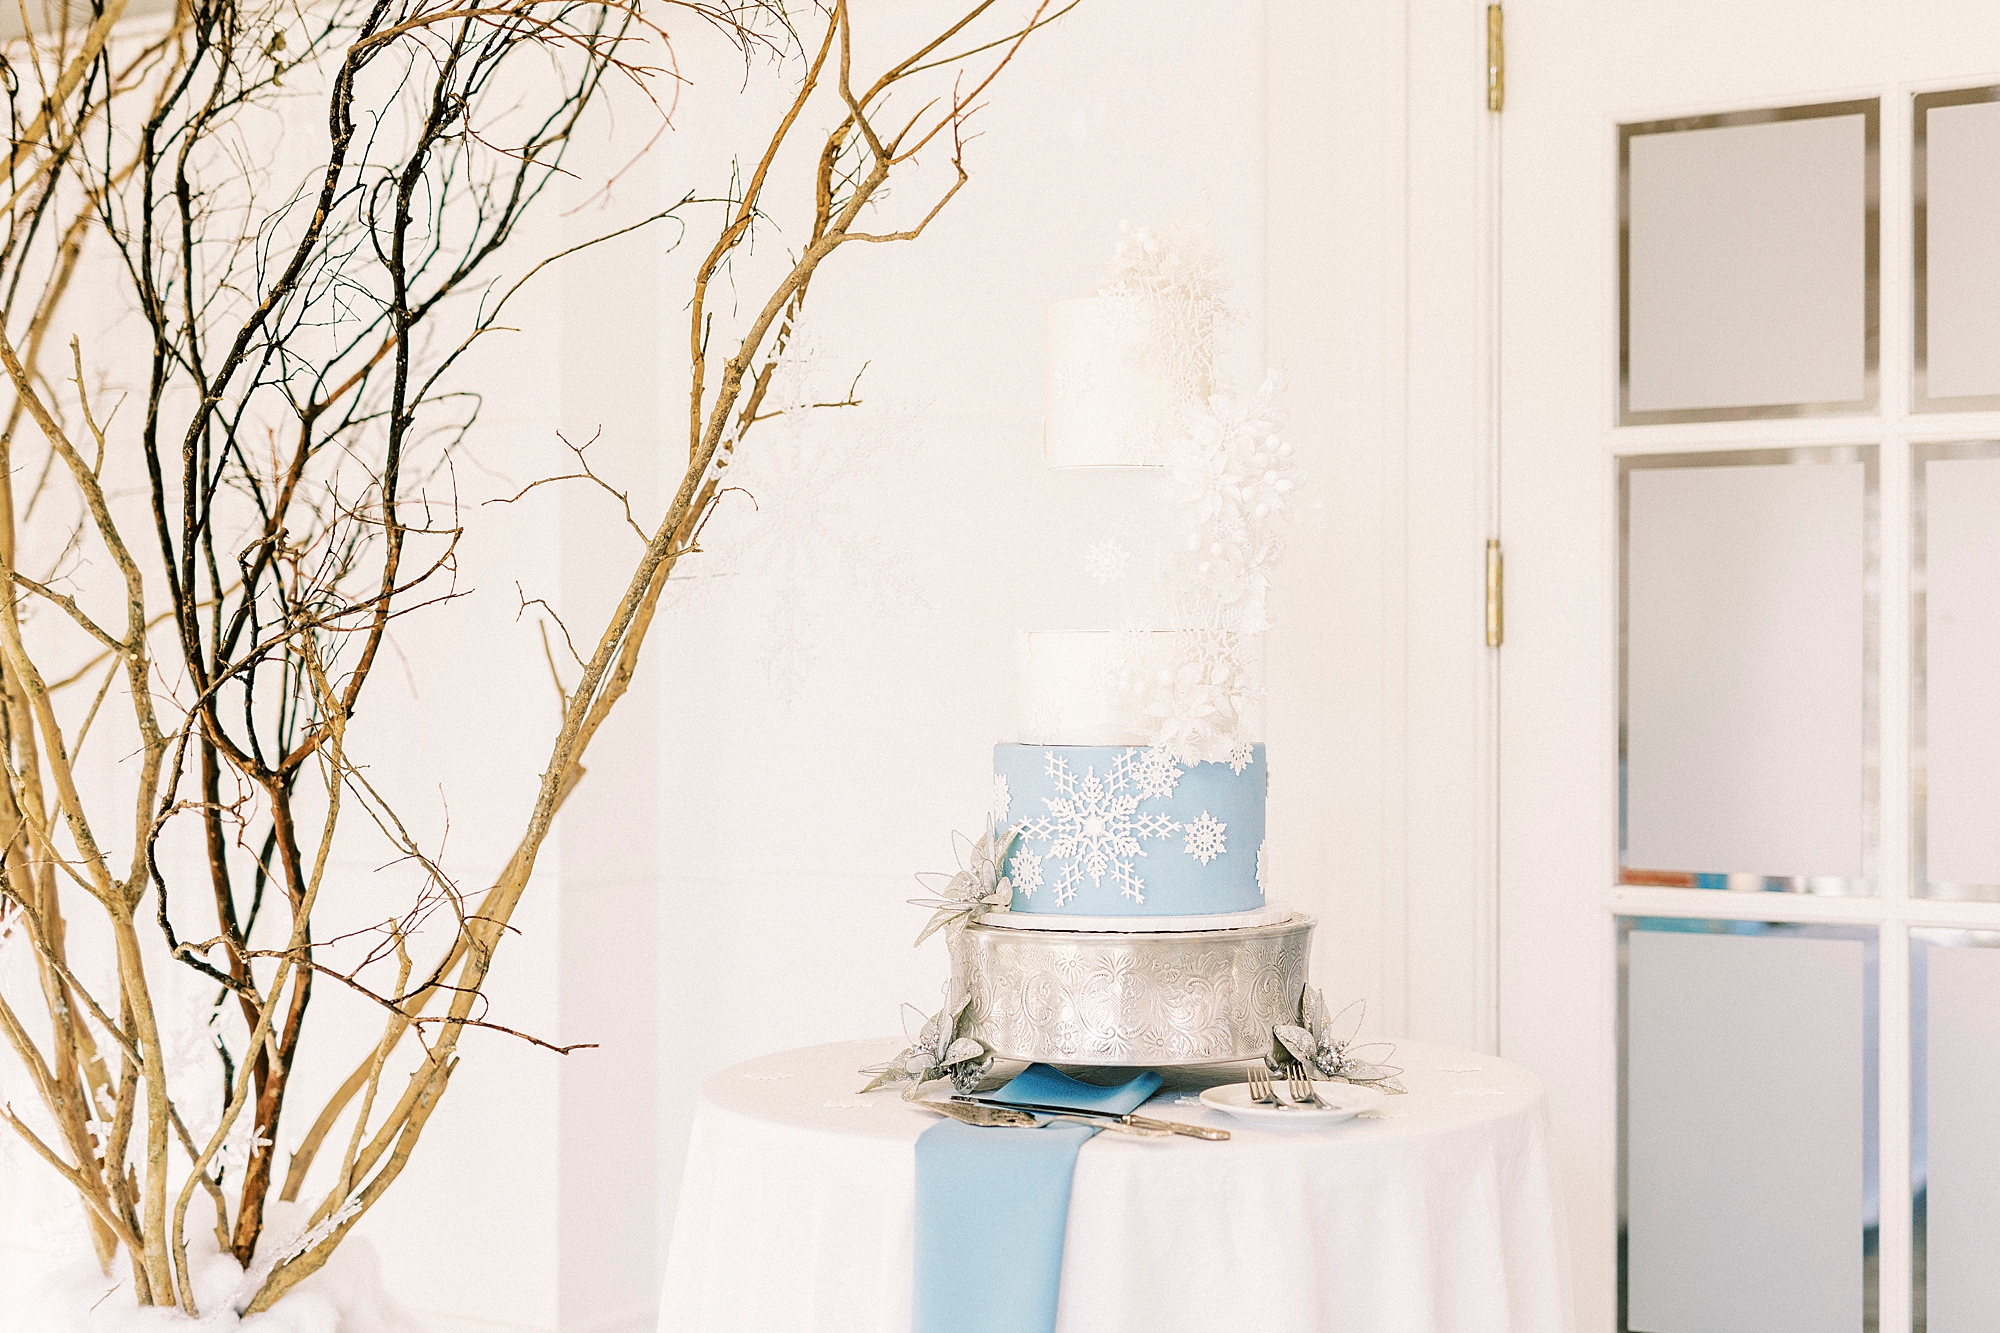 tiered wedding cake with blue and white snowflakes